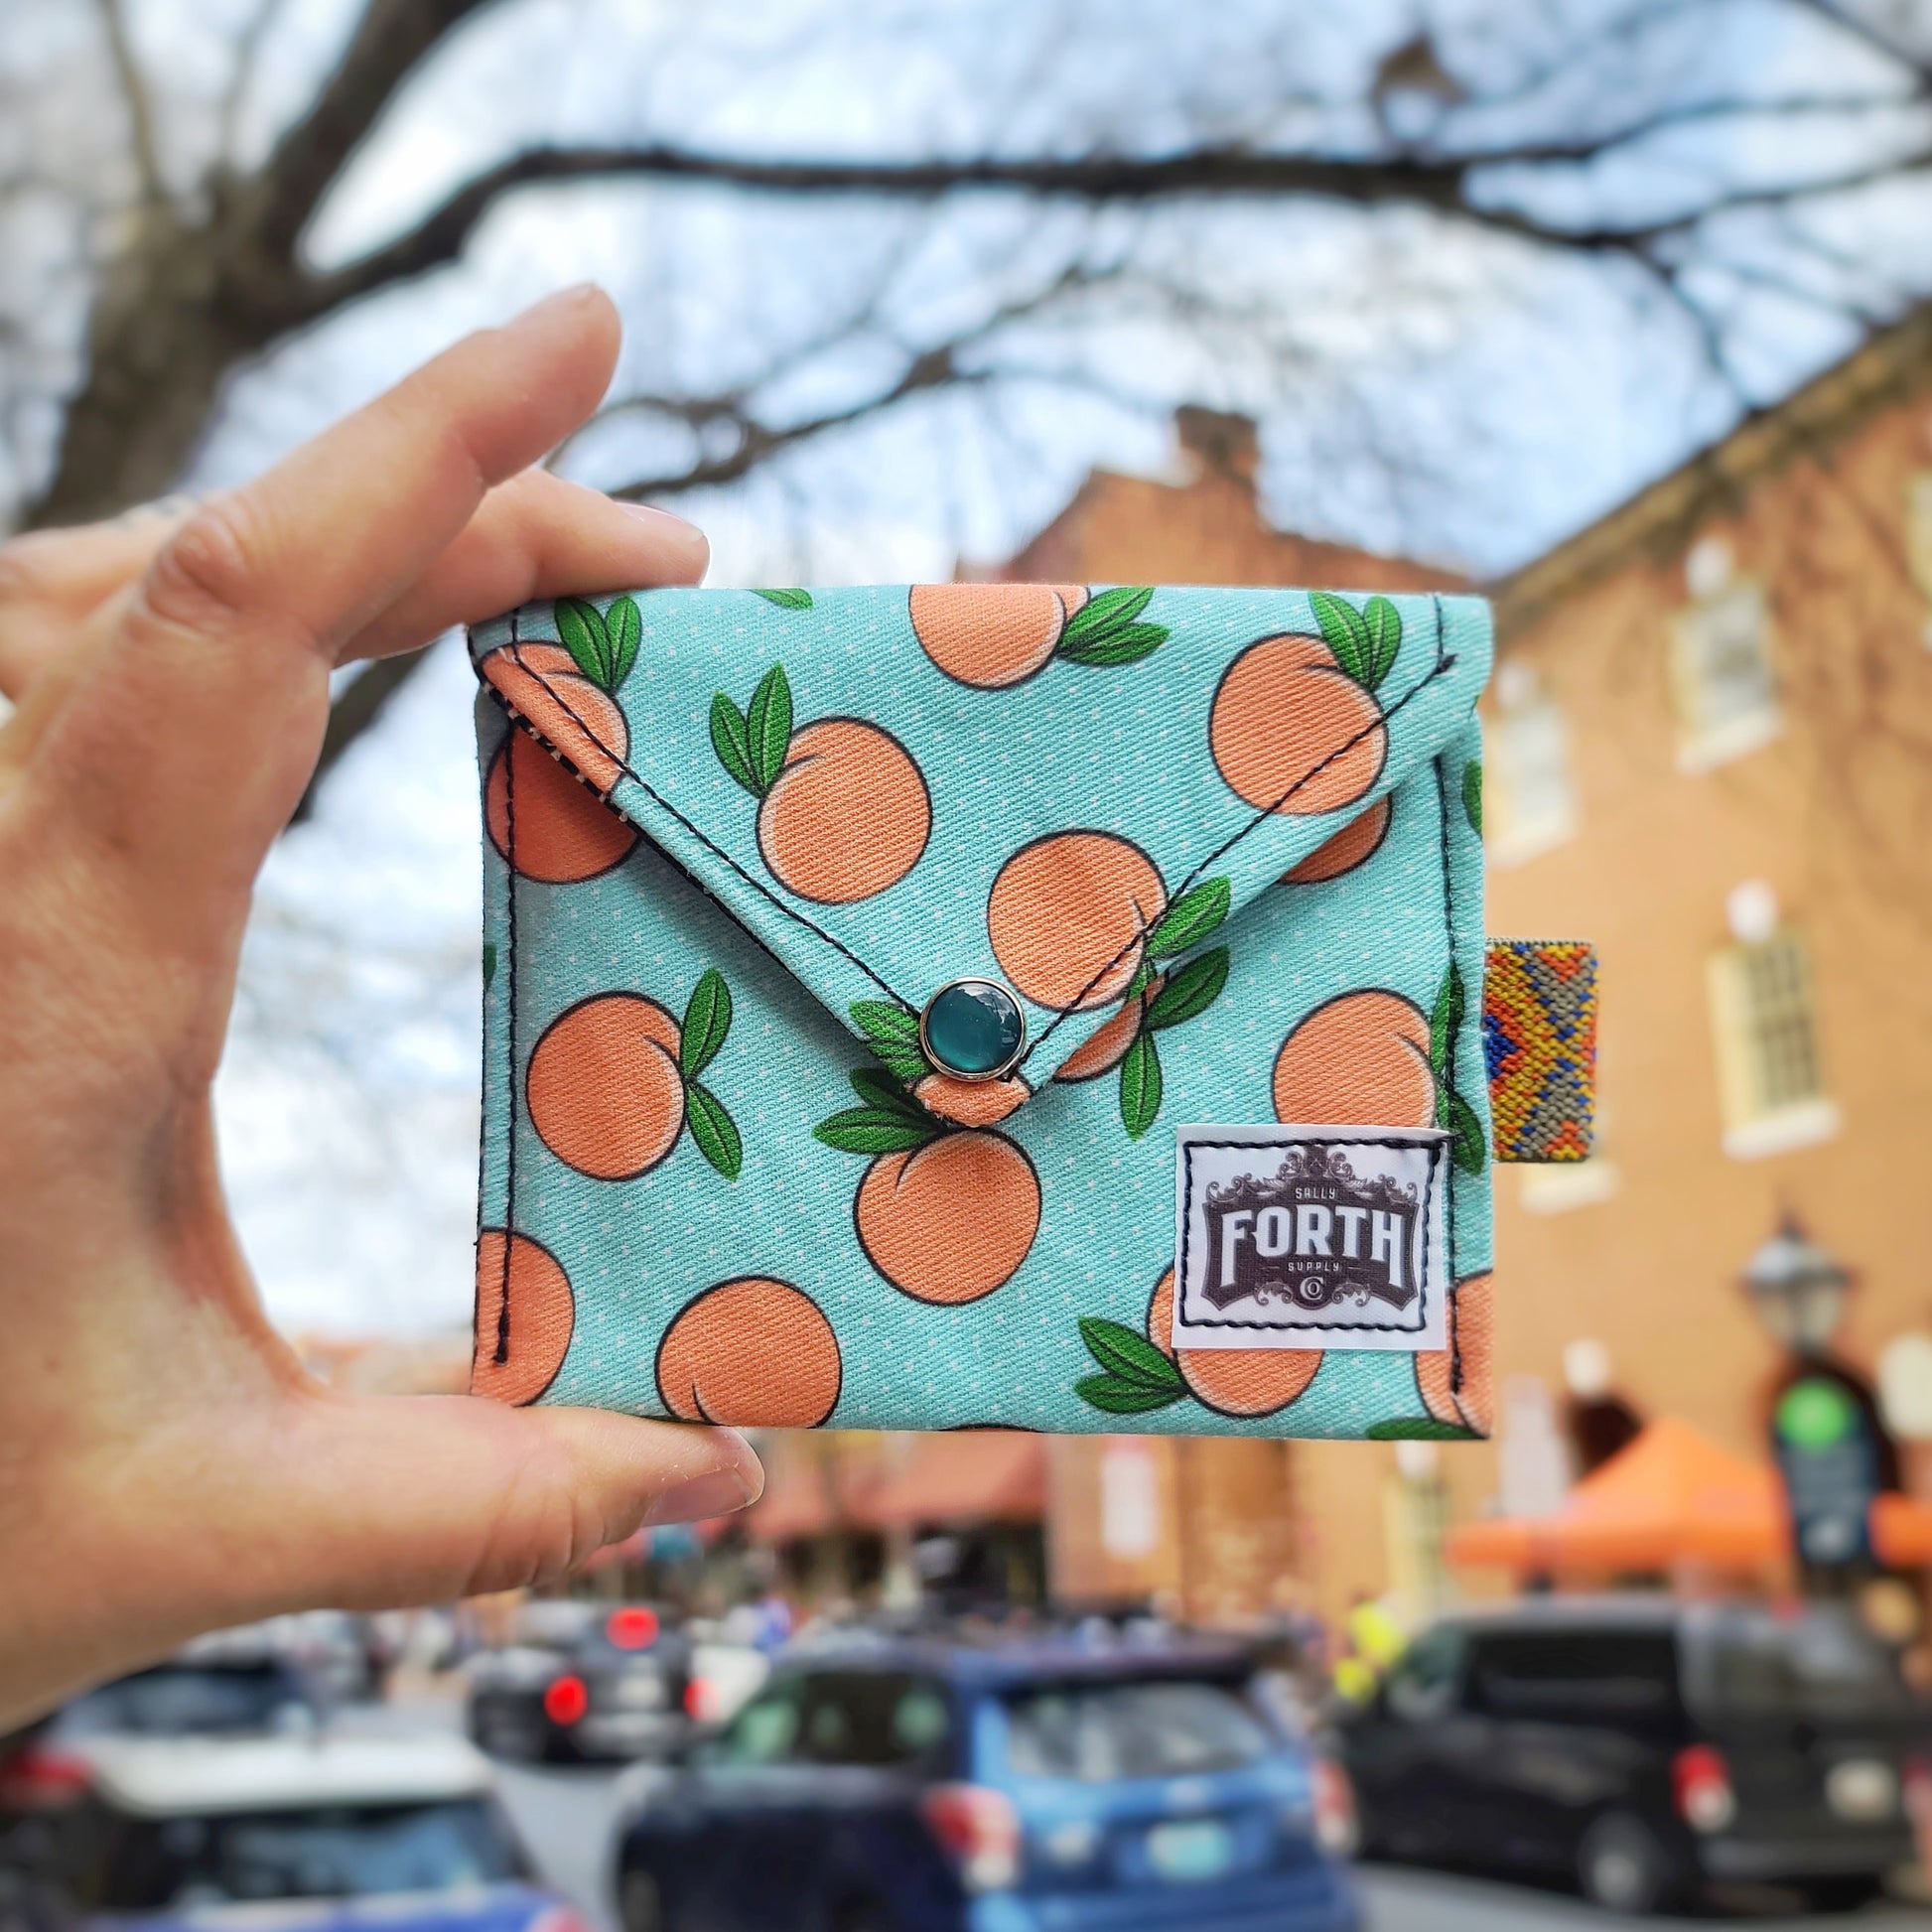 The Original Chapstick Wallet! The Avail: Rob the Bank - Sally Forth Supply Co.